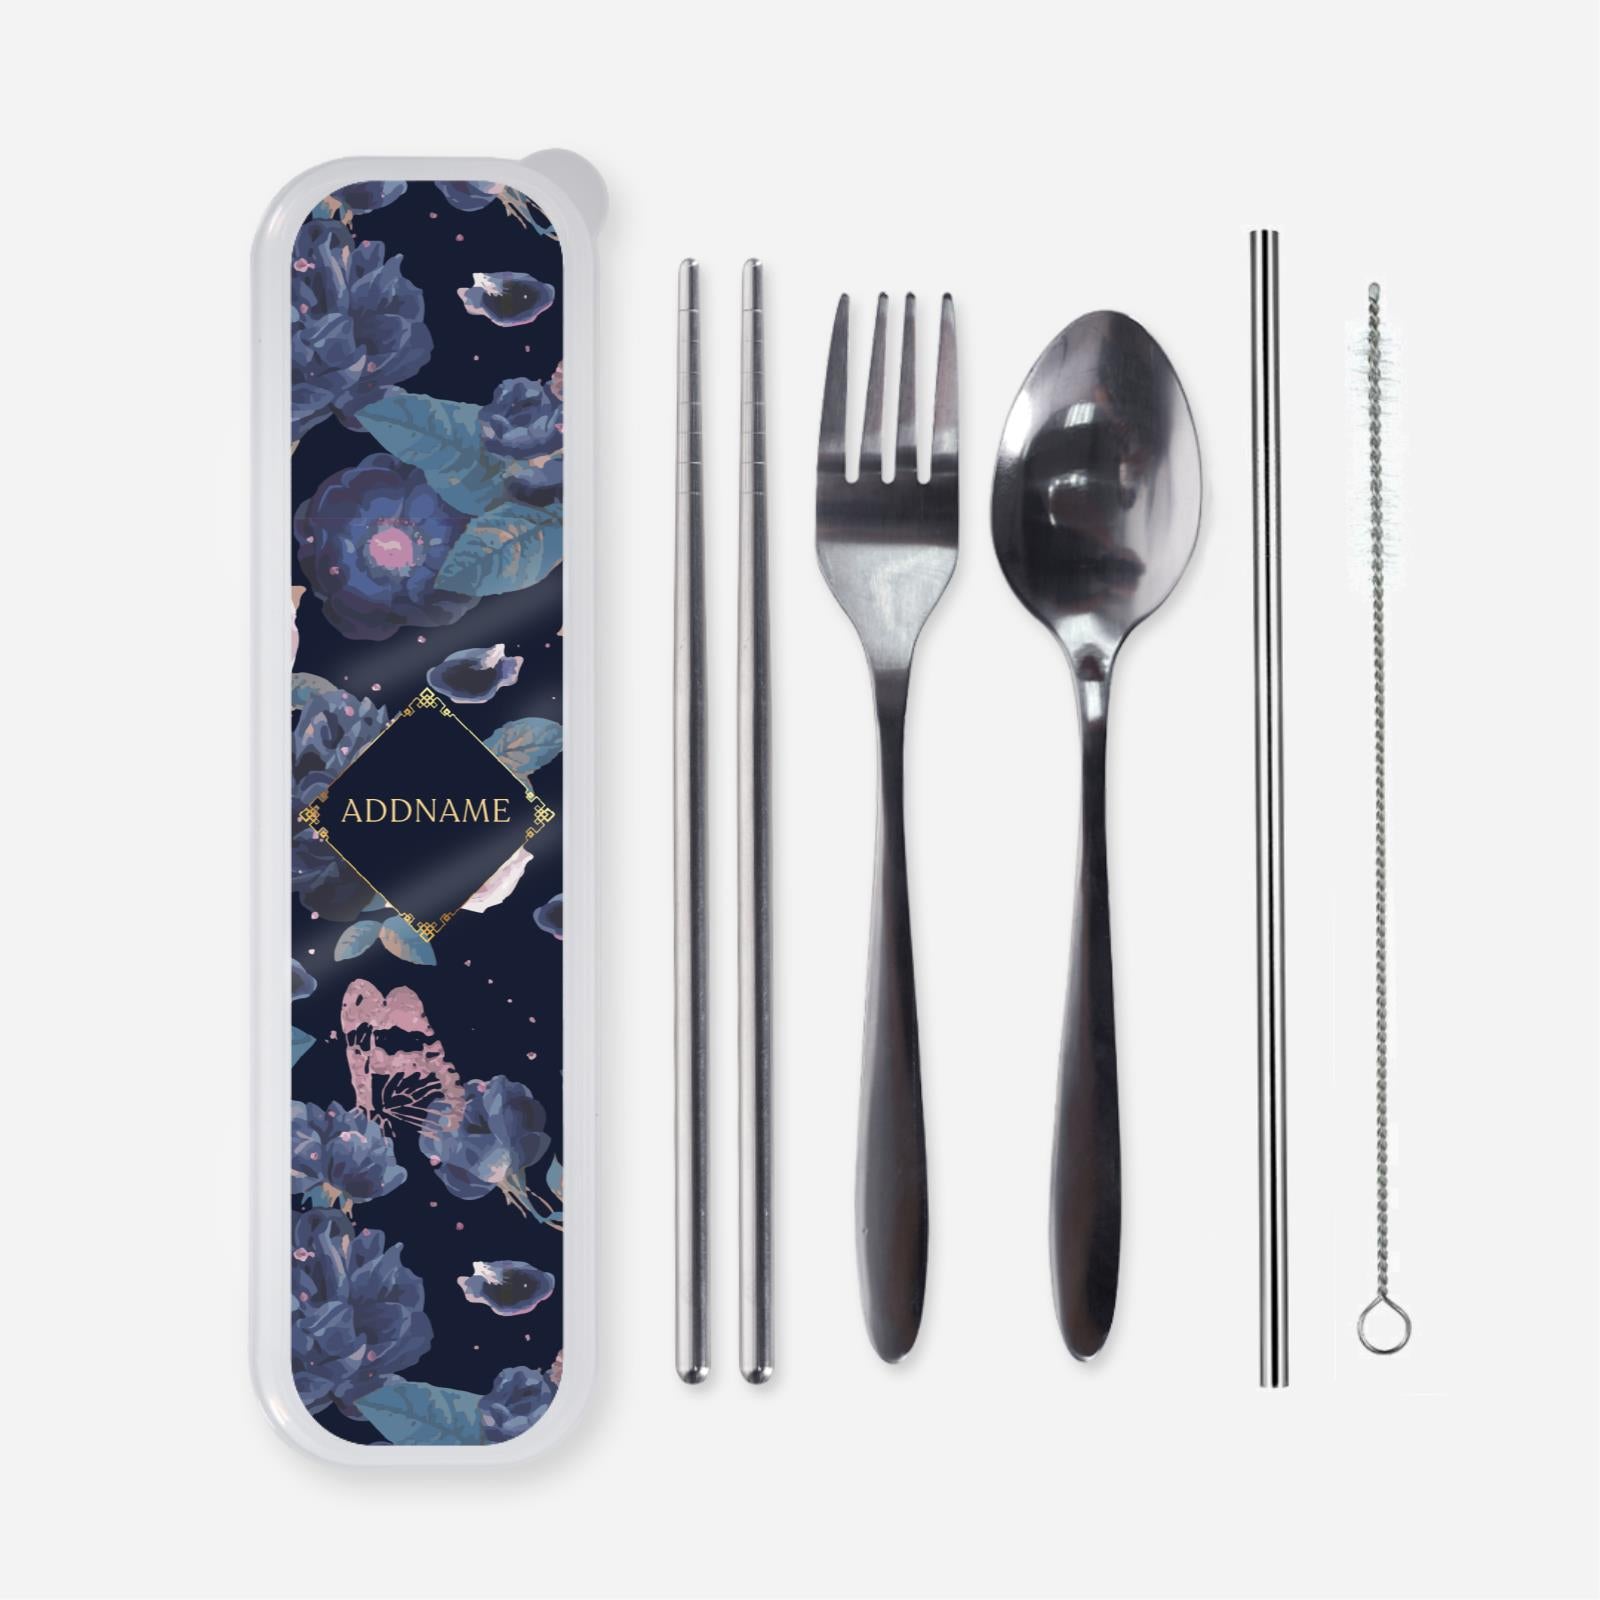 Royal Floral Series - Serene Moonlight Cutlery With English Personalization